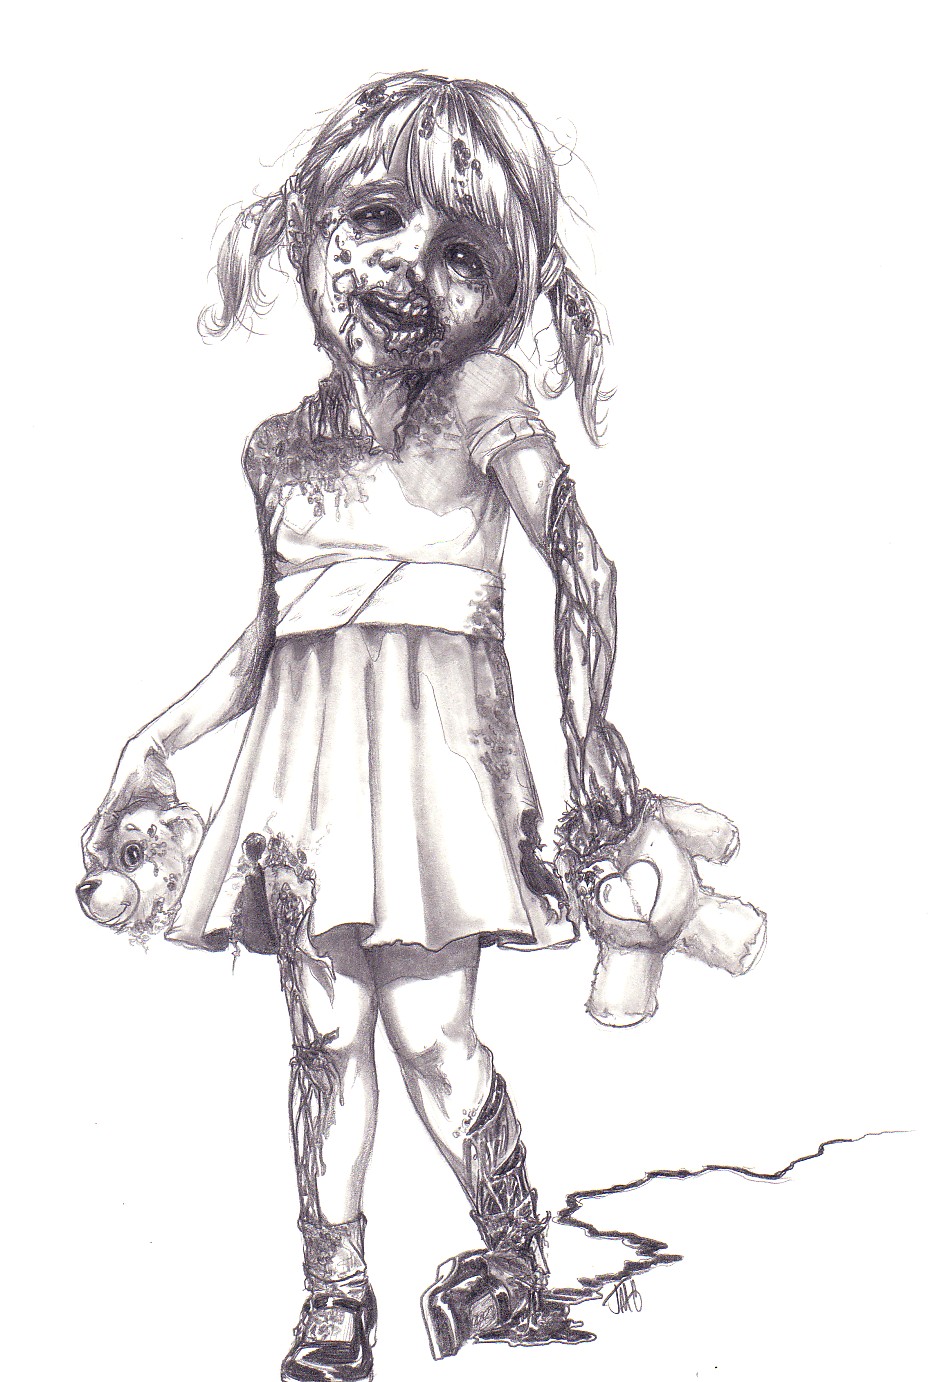 Cool Zombie Drawings